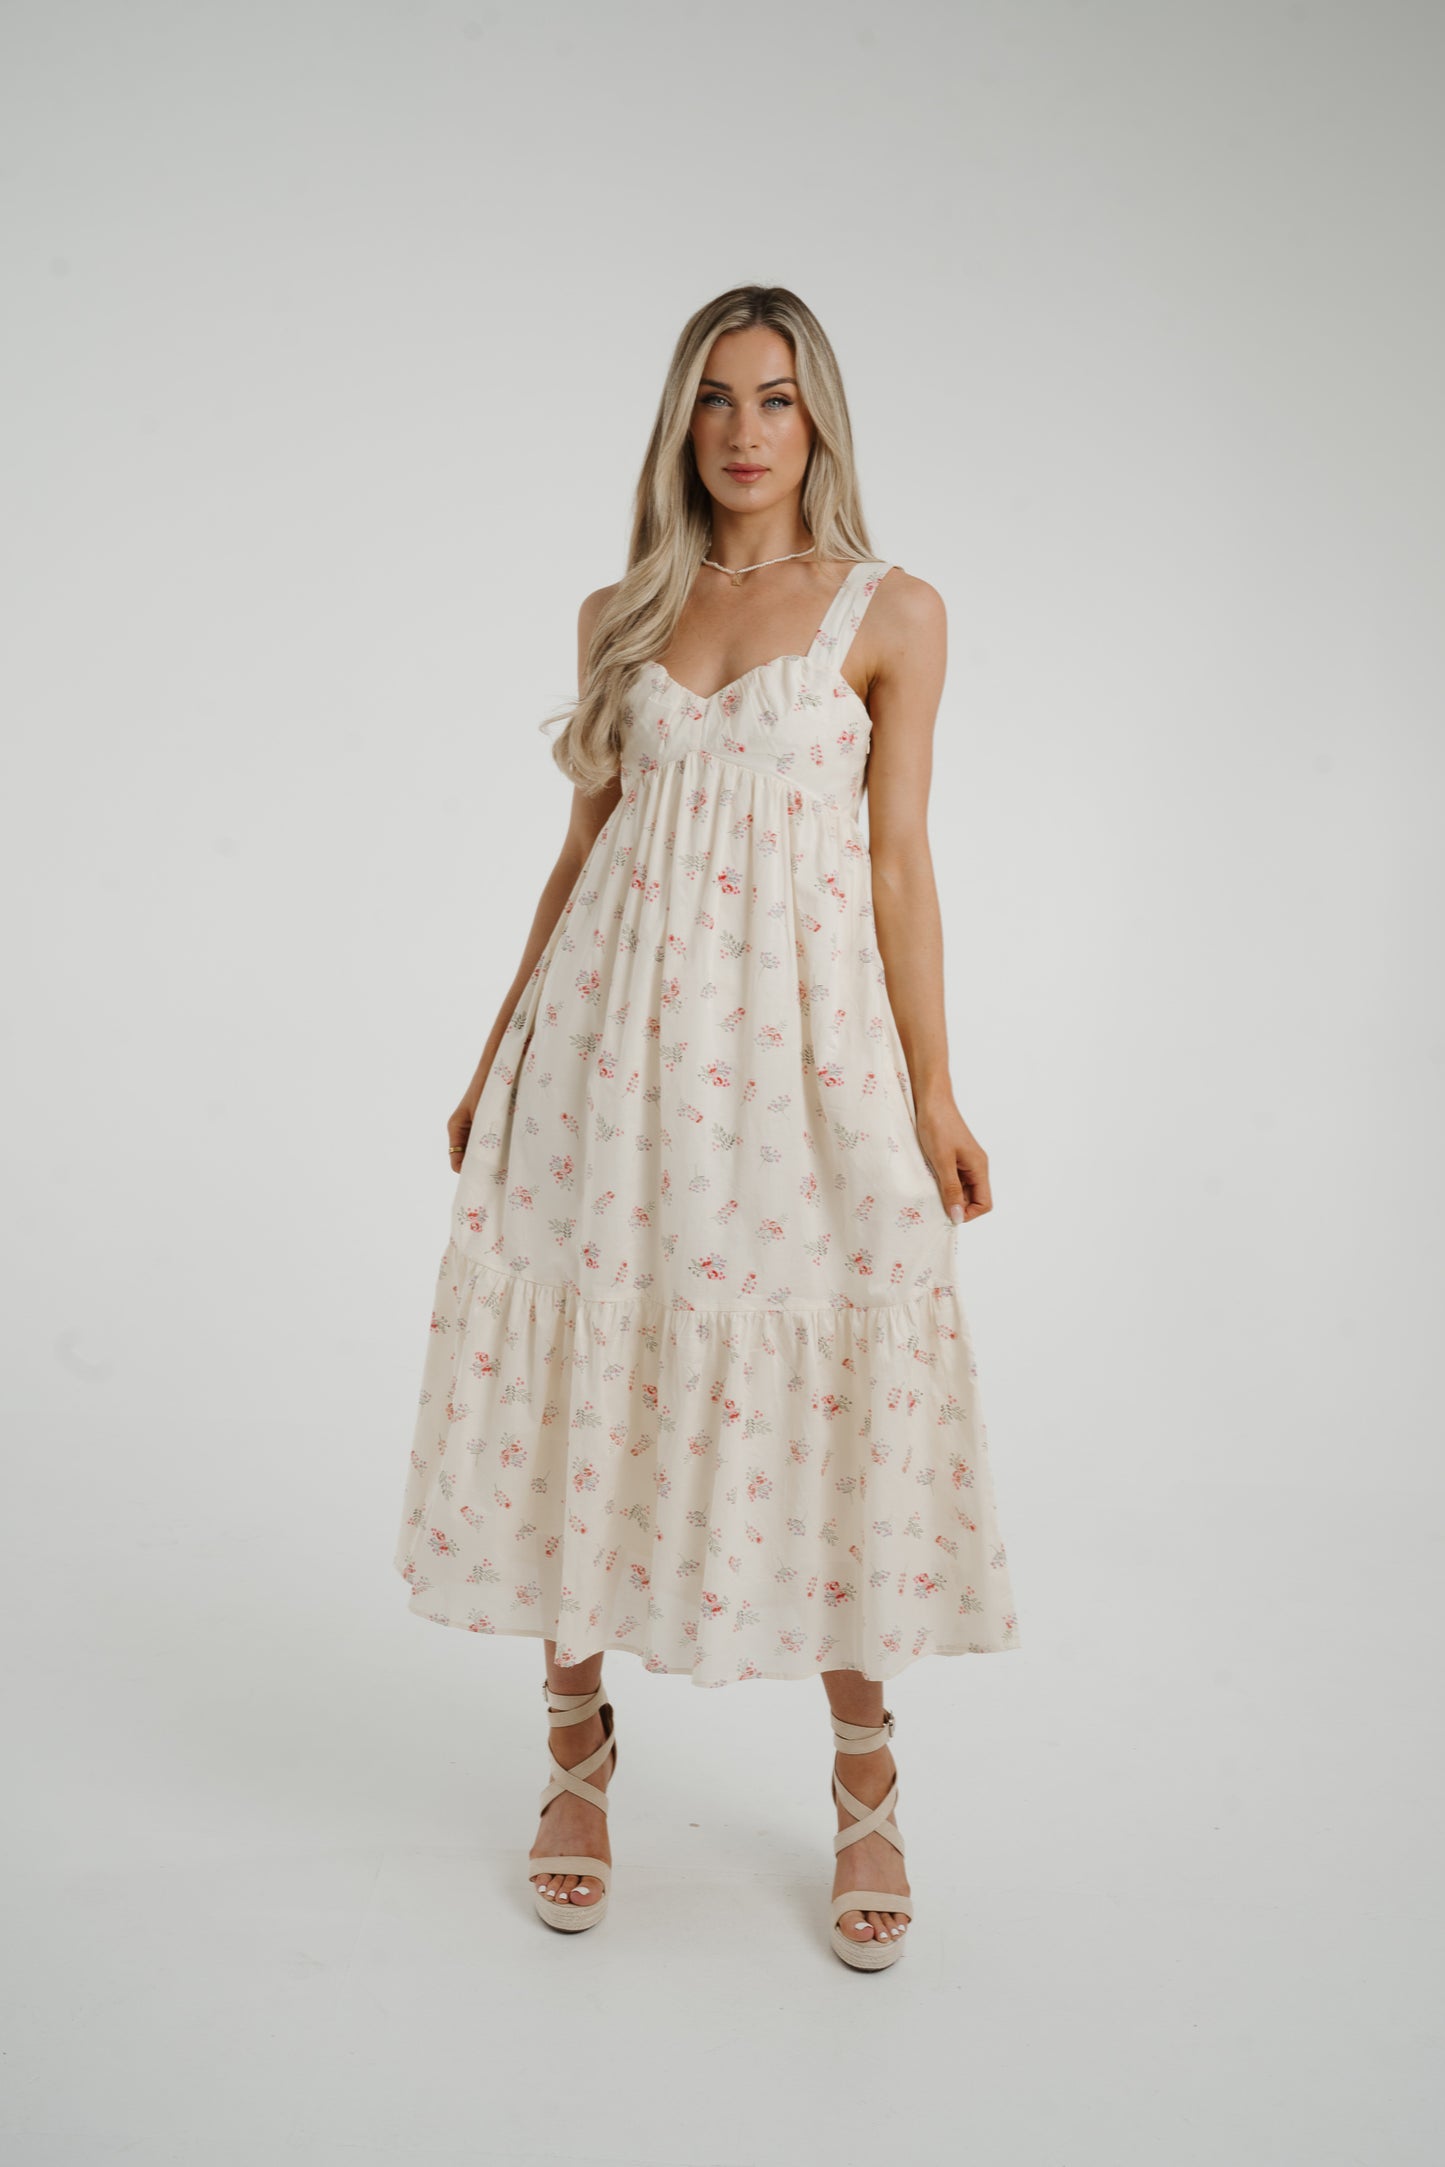 Daisy Pink Floral Dress In Cream